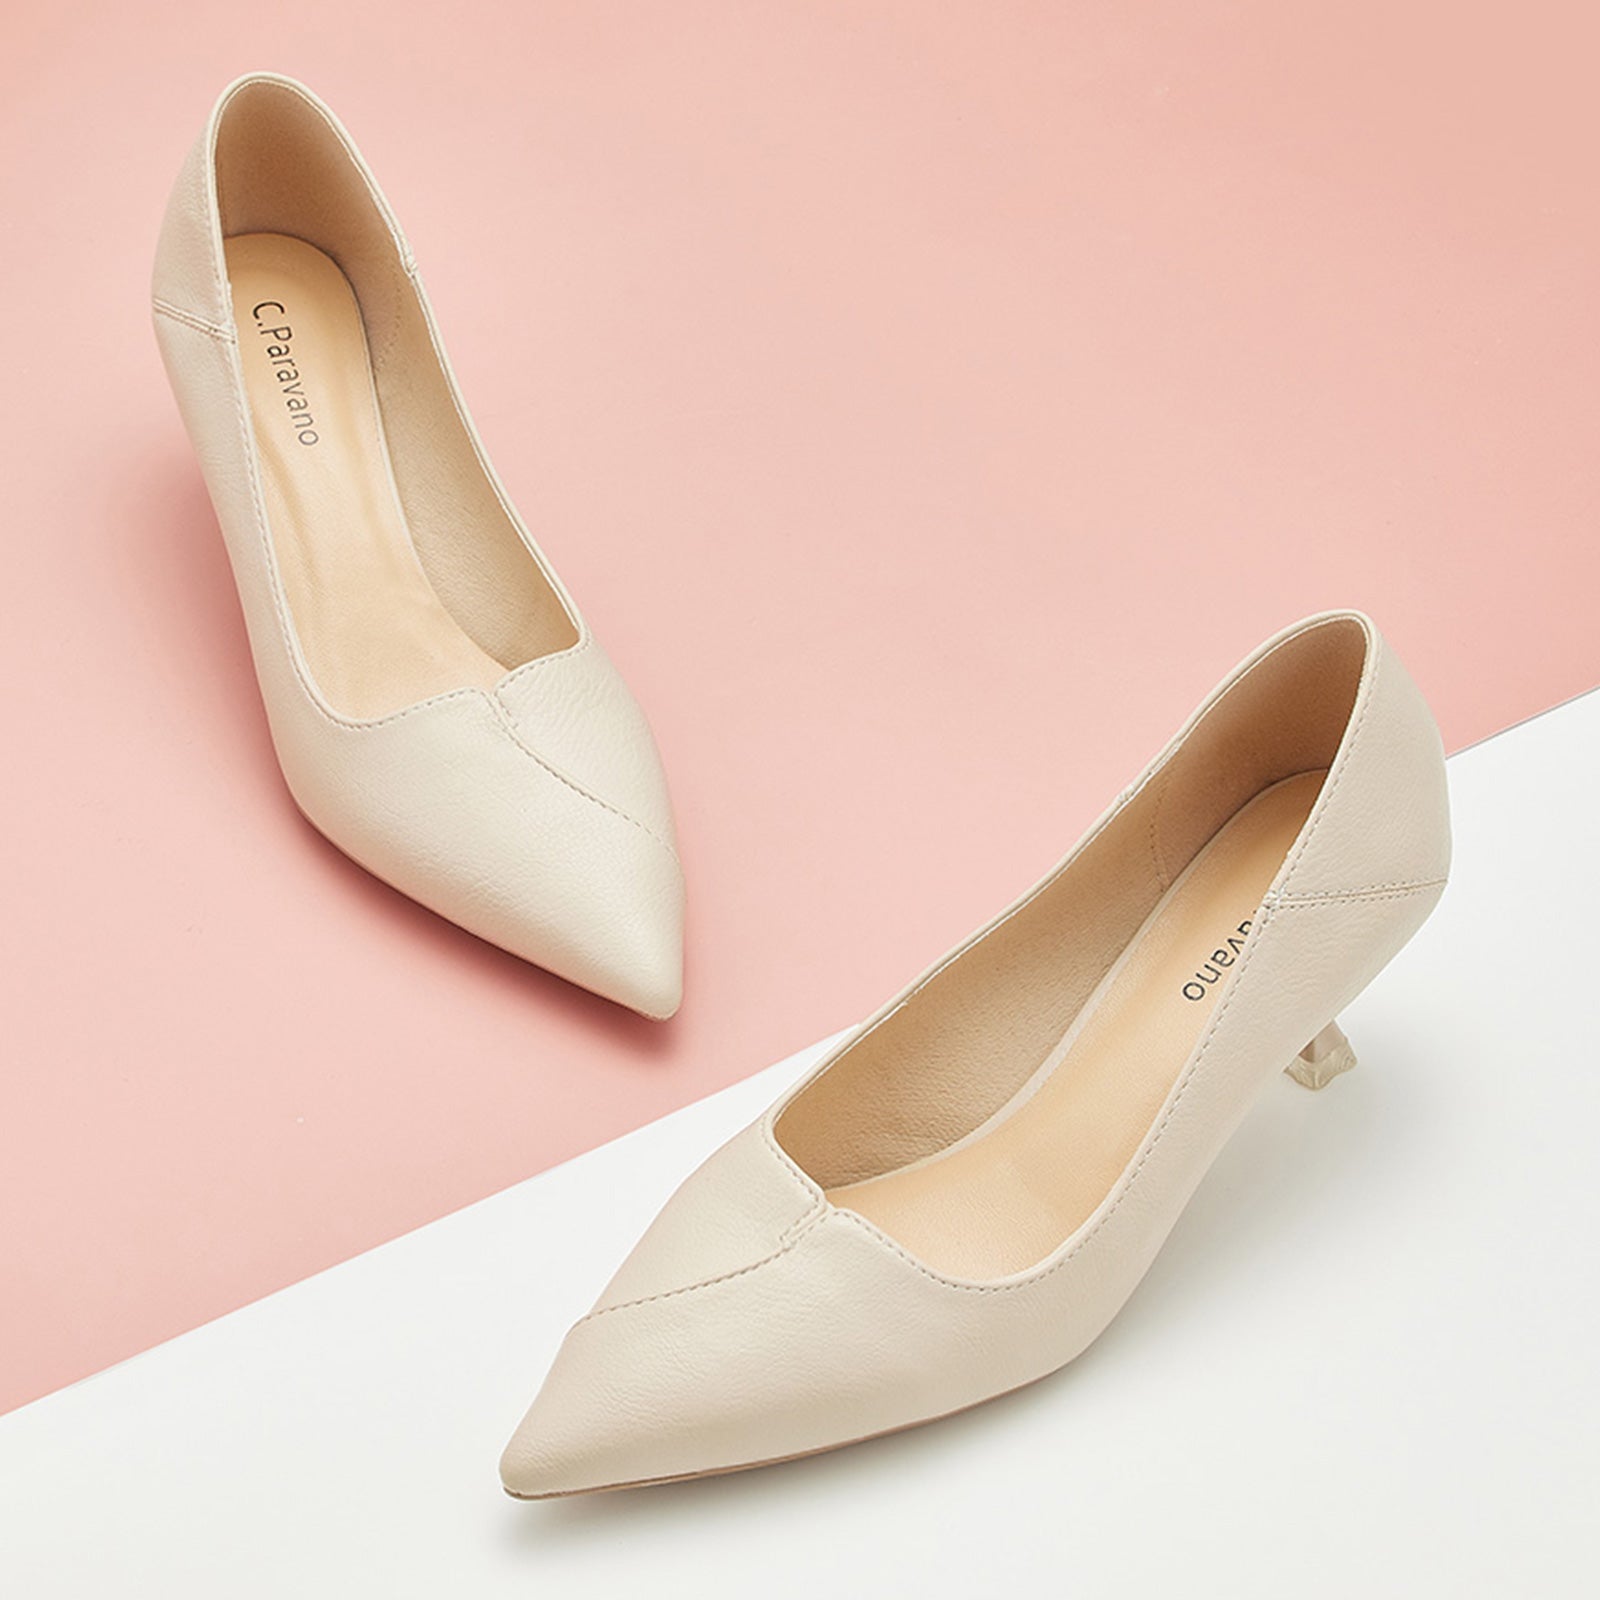 Convertible Pumps in White with a stylish kitten heel, featuring classic details for a polished and sophisticated style.